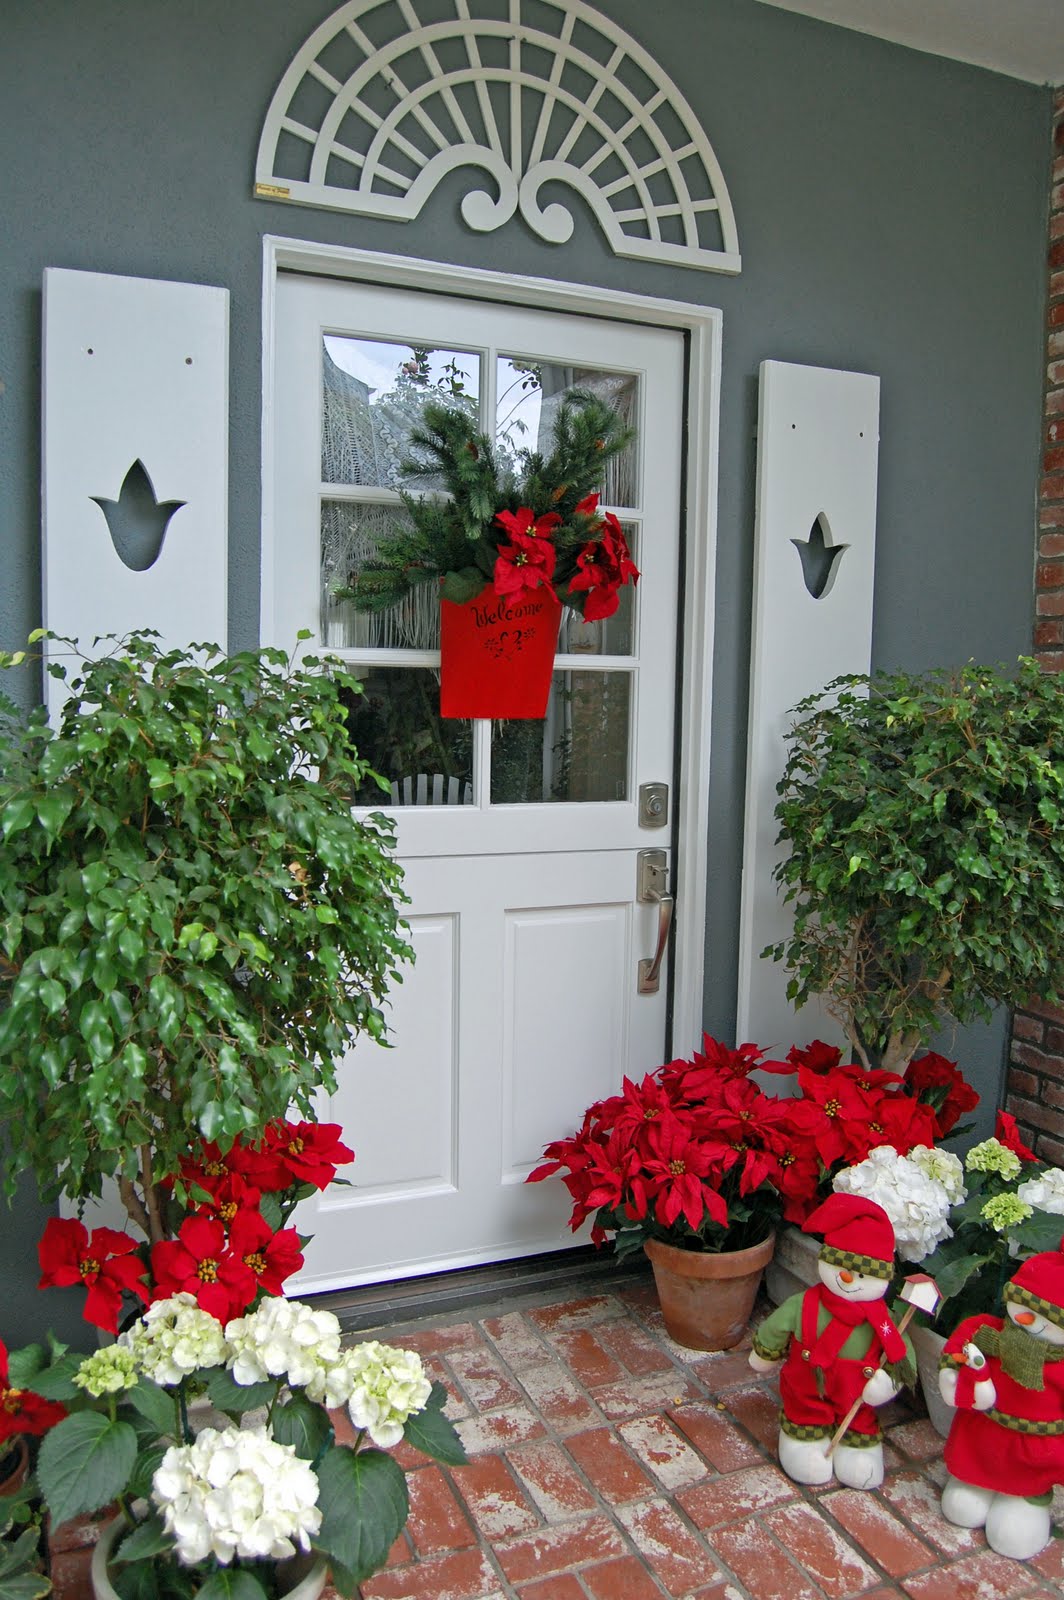 Find Perfection With Poinsettias